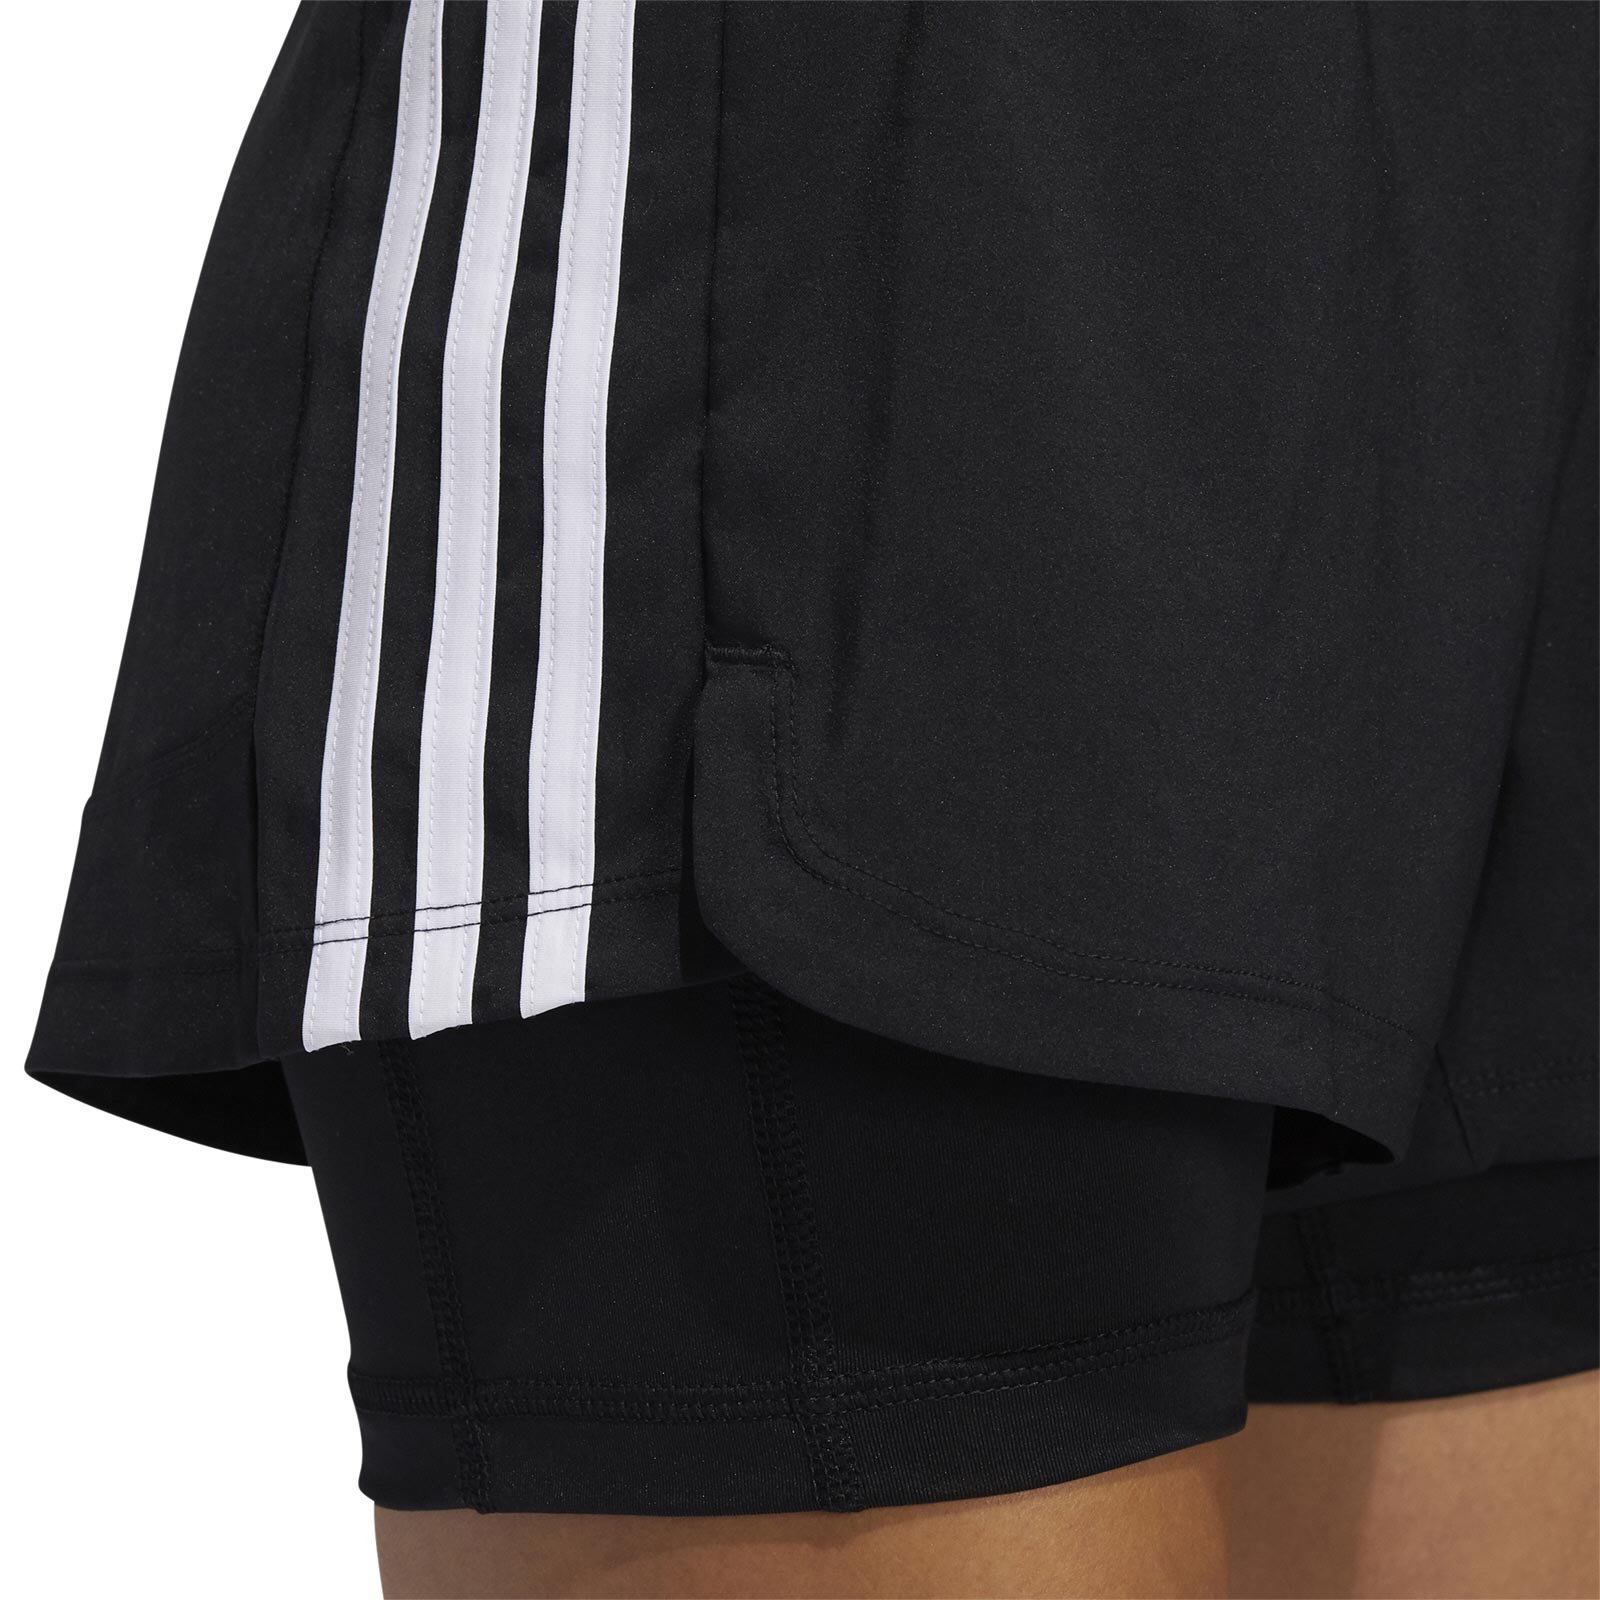 adidas Pacer 3-Stripes 2-in-1 Womens Shorts